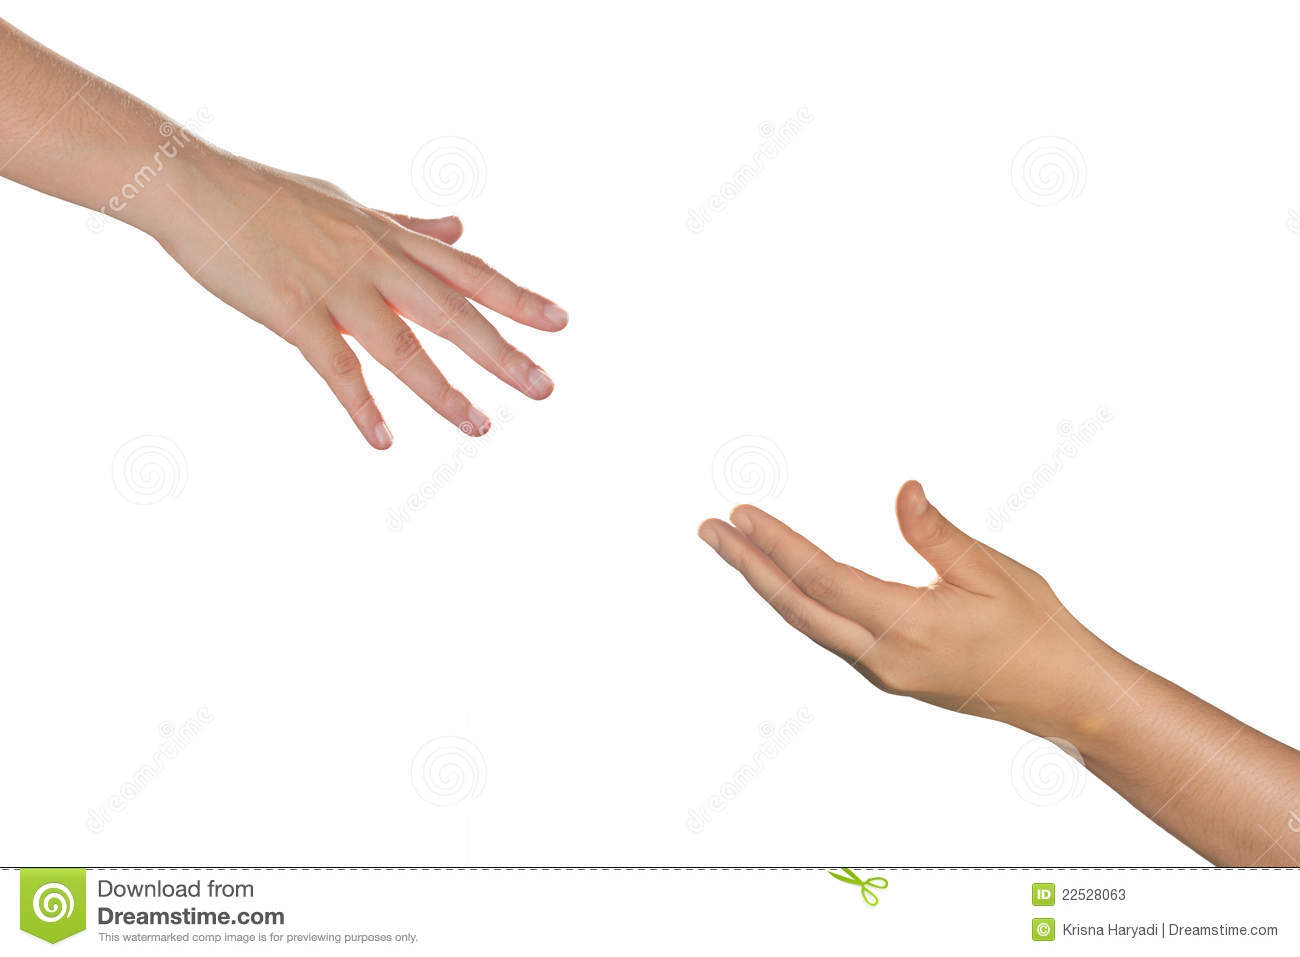 Hands Reaching Each Other  Stock Photos   Image  22528063